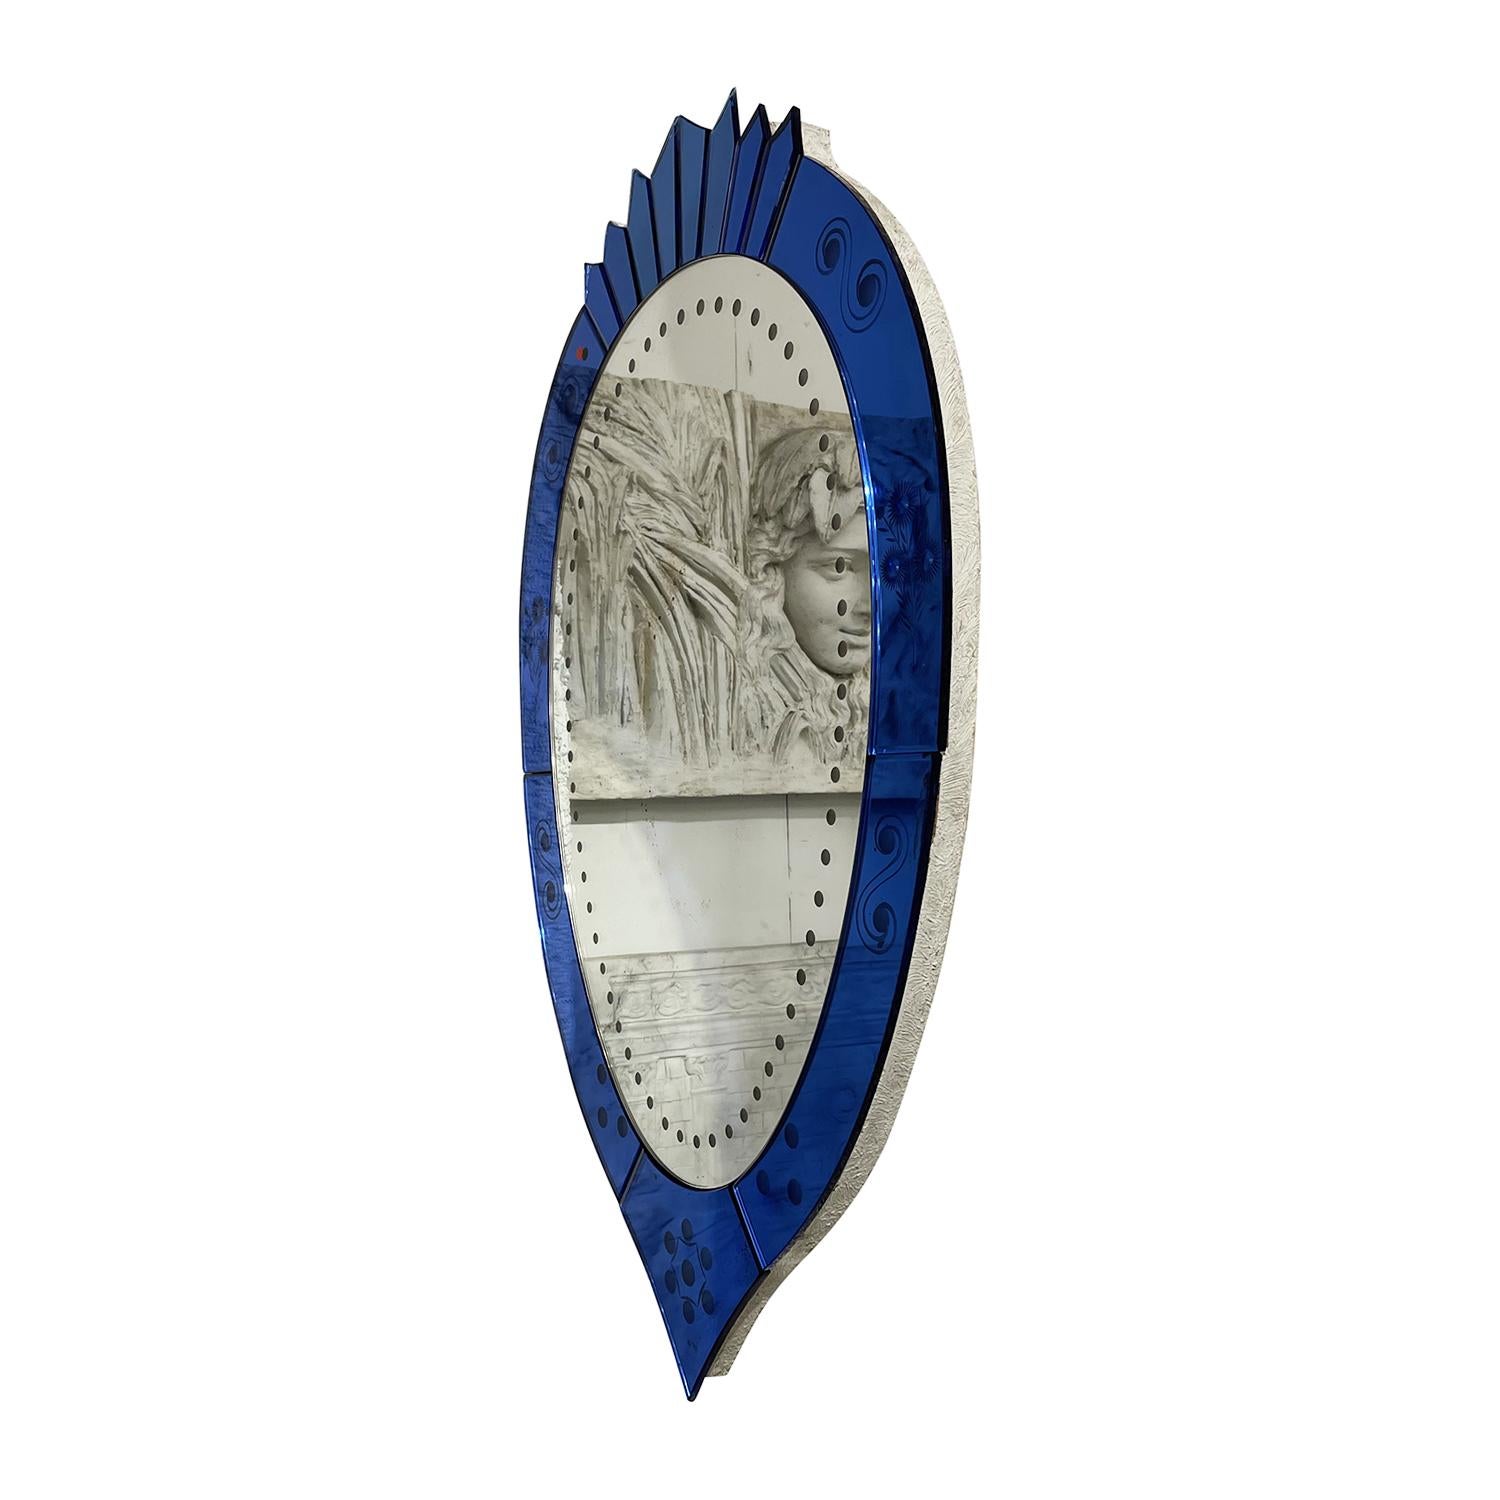 A dark-blue, vintage Mid-Century Modern Italian wall mirror made of hand blown cut crystal glass with its original colorful mirror glass, produced by Cristal Art in good condition. The wall décor piece is enhanced by detailed glass art,